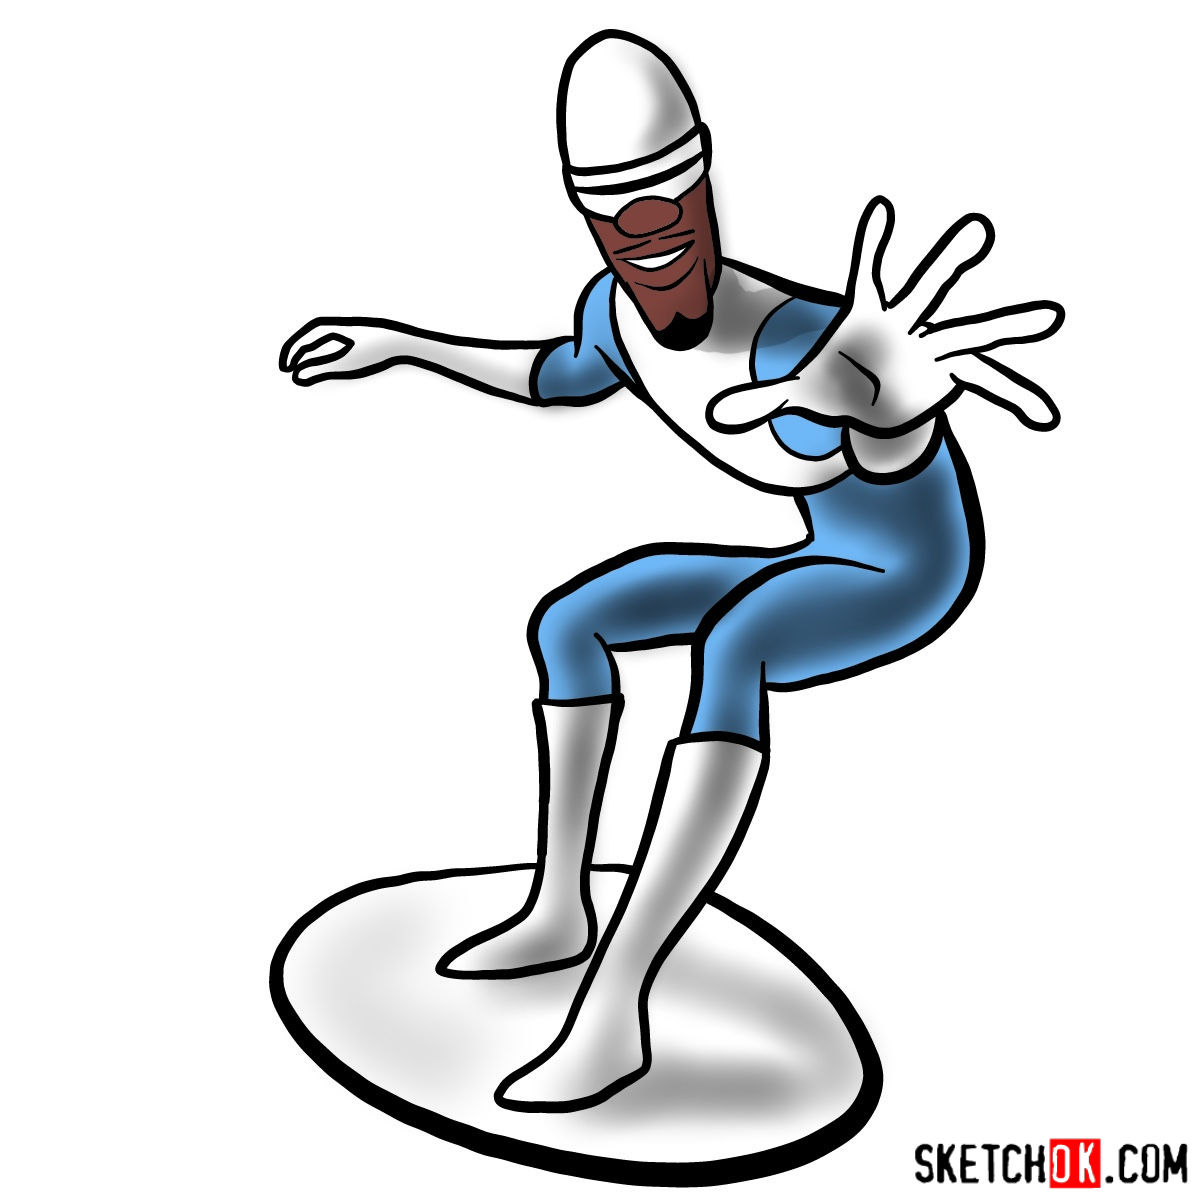 How to draw Lucius Best (Frozone)